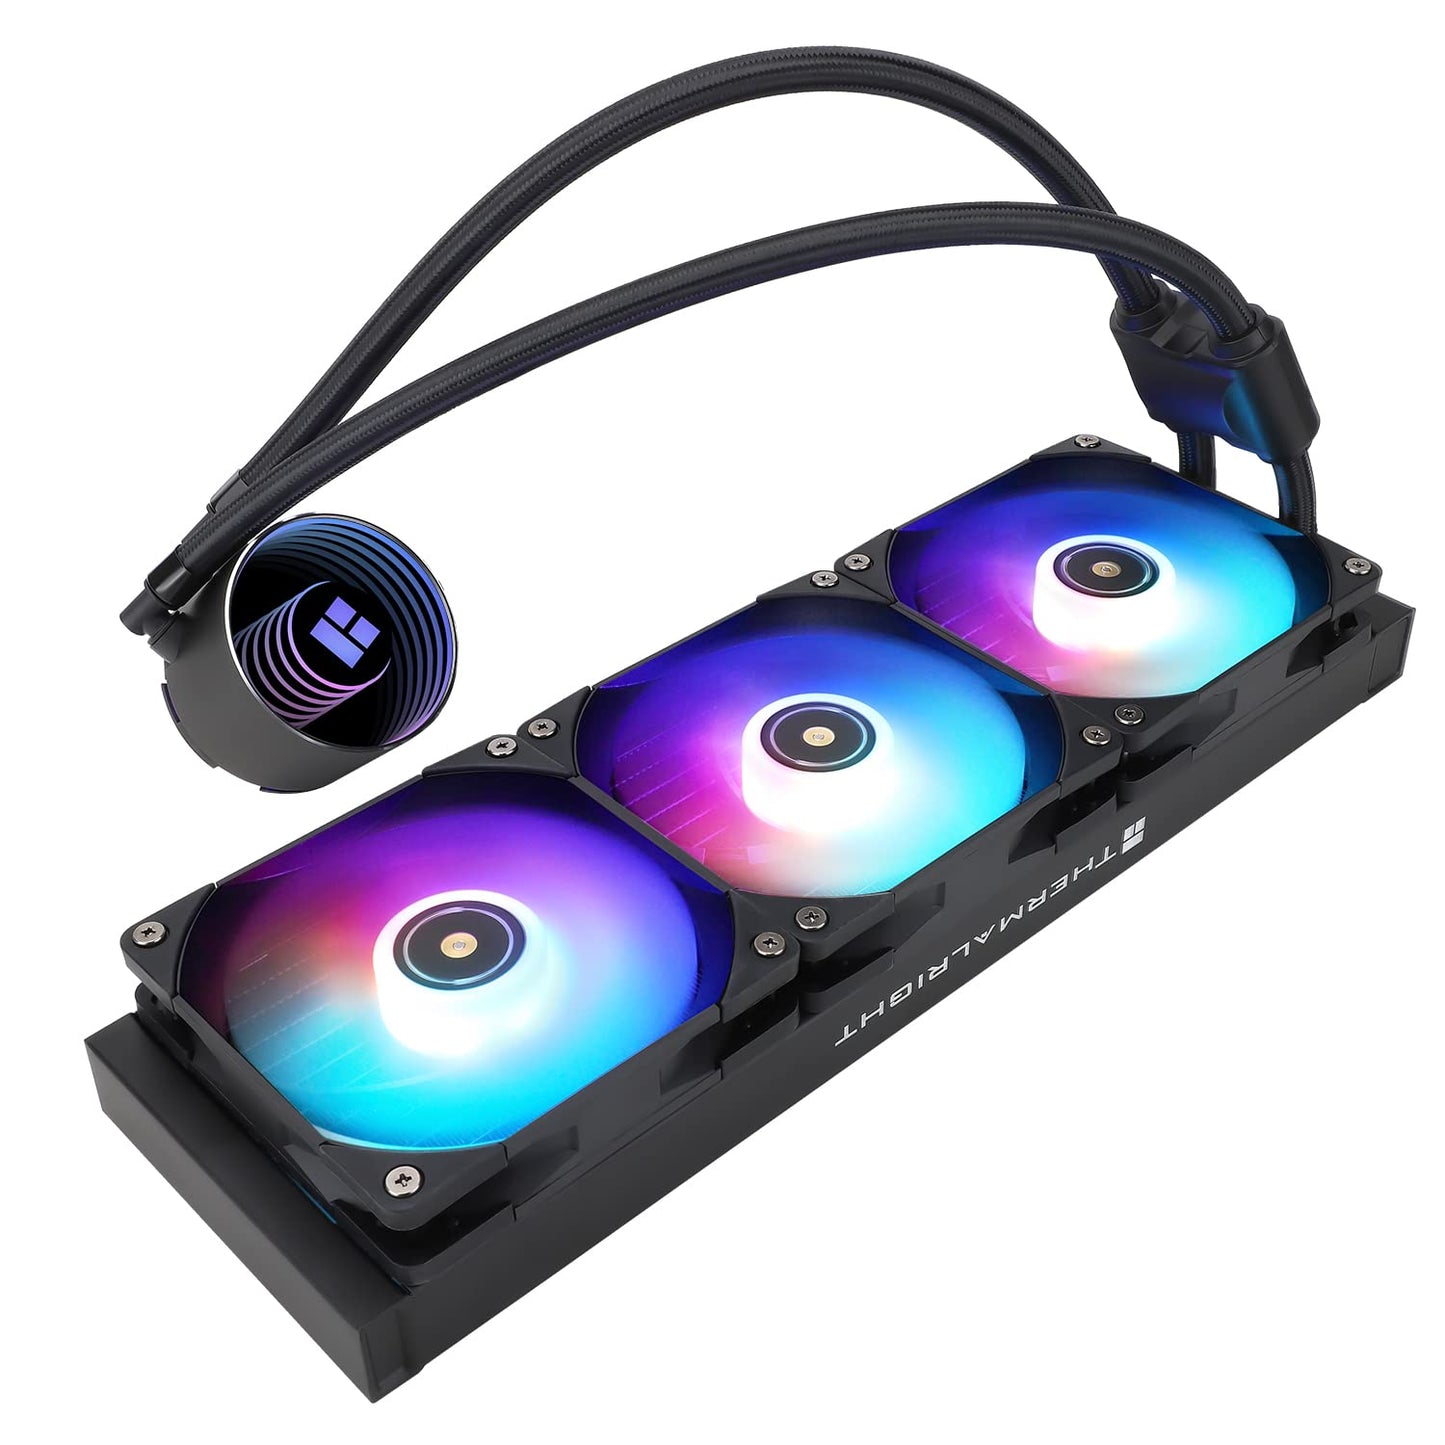 Thermalright Frozen Notte 360 Black ARGB Water Cooling CPU Cooler, 360 Black CPU Cooler Specifications, 3×120mm PWM Fans, S-FDB V2 Bearings, Suitable for AMD/AM4/AM5, Intel 1700/1150/1151/1200/2011